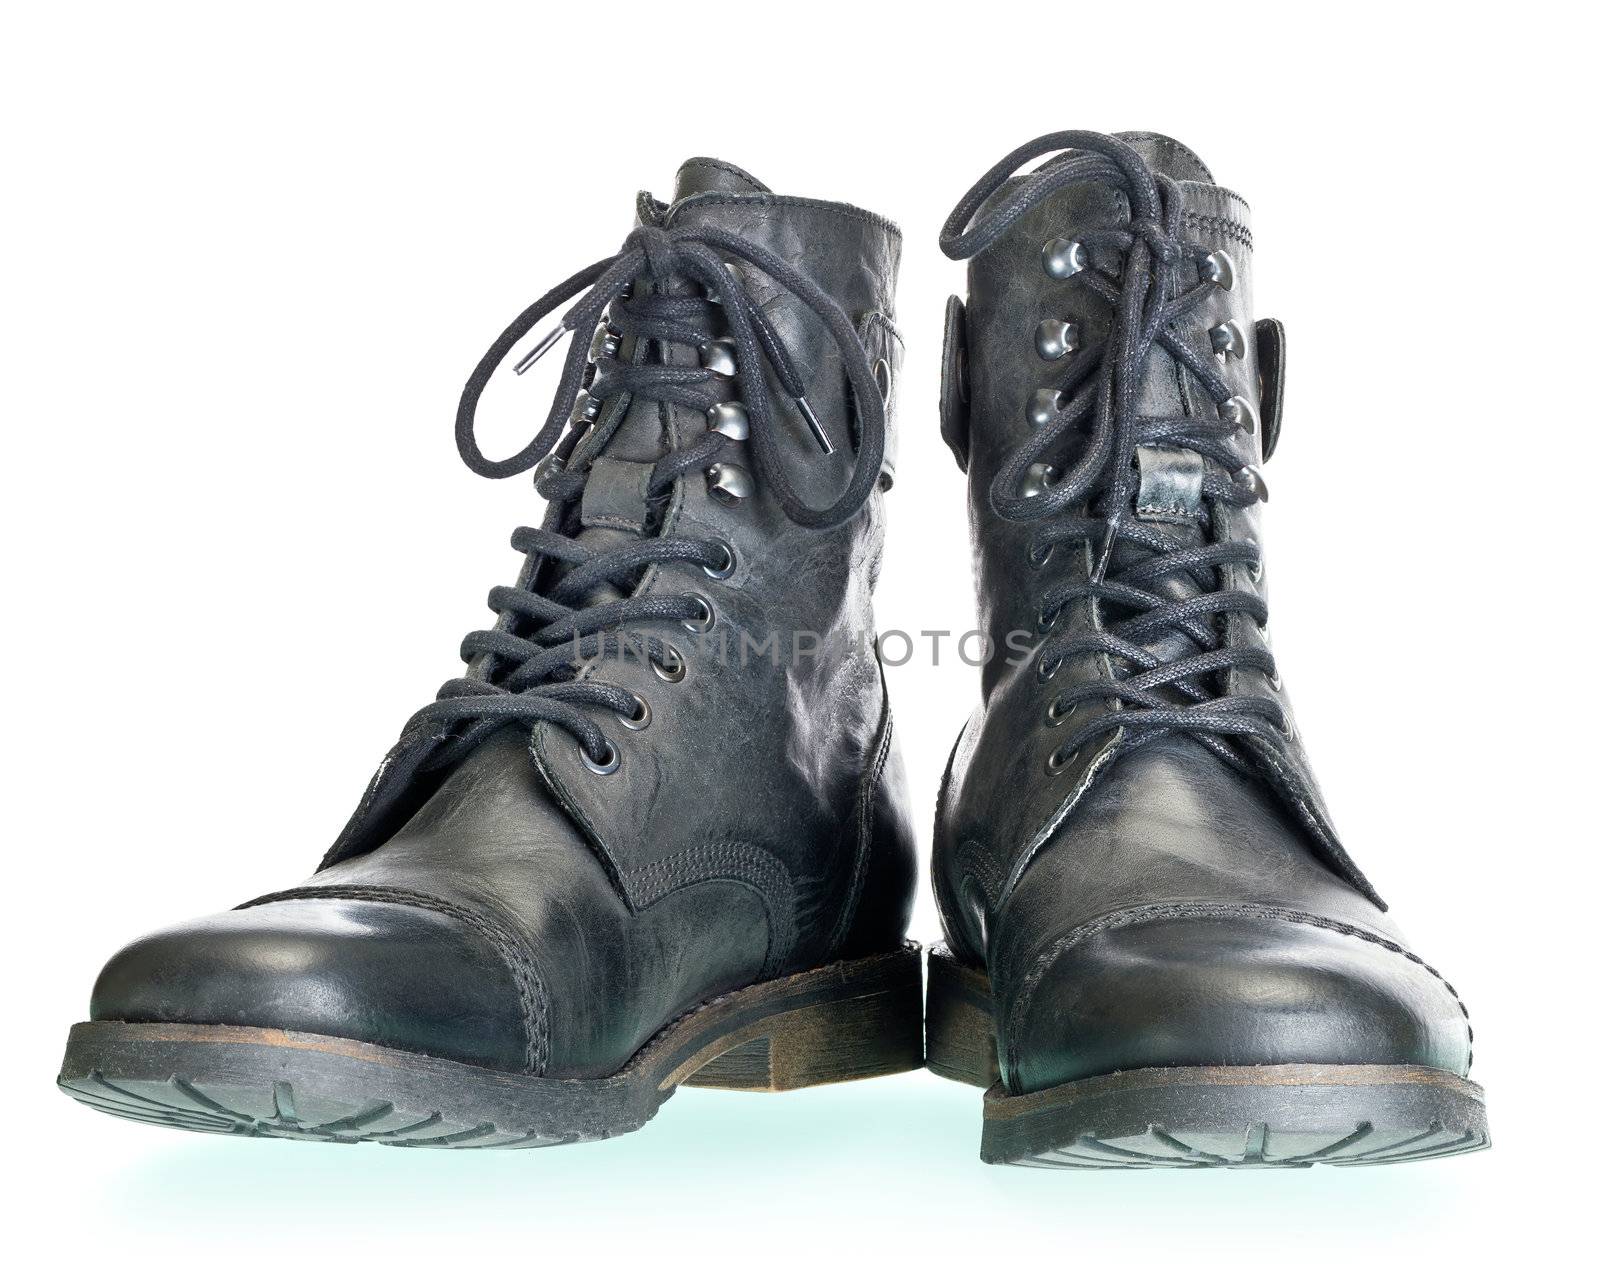 pair of coarse male boots isolated on white background. The image collected from several photos for larger areas of focus.